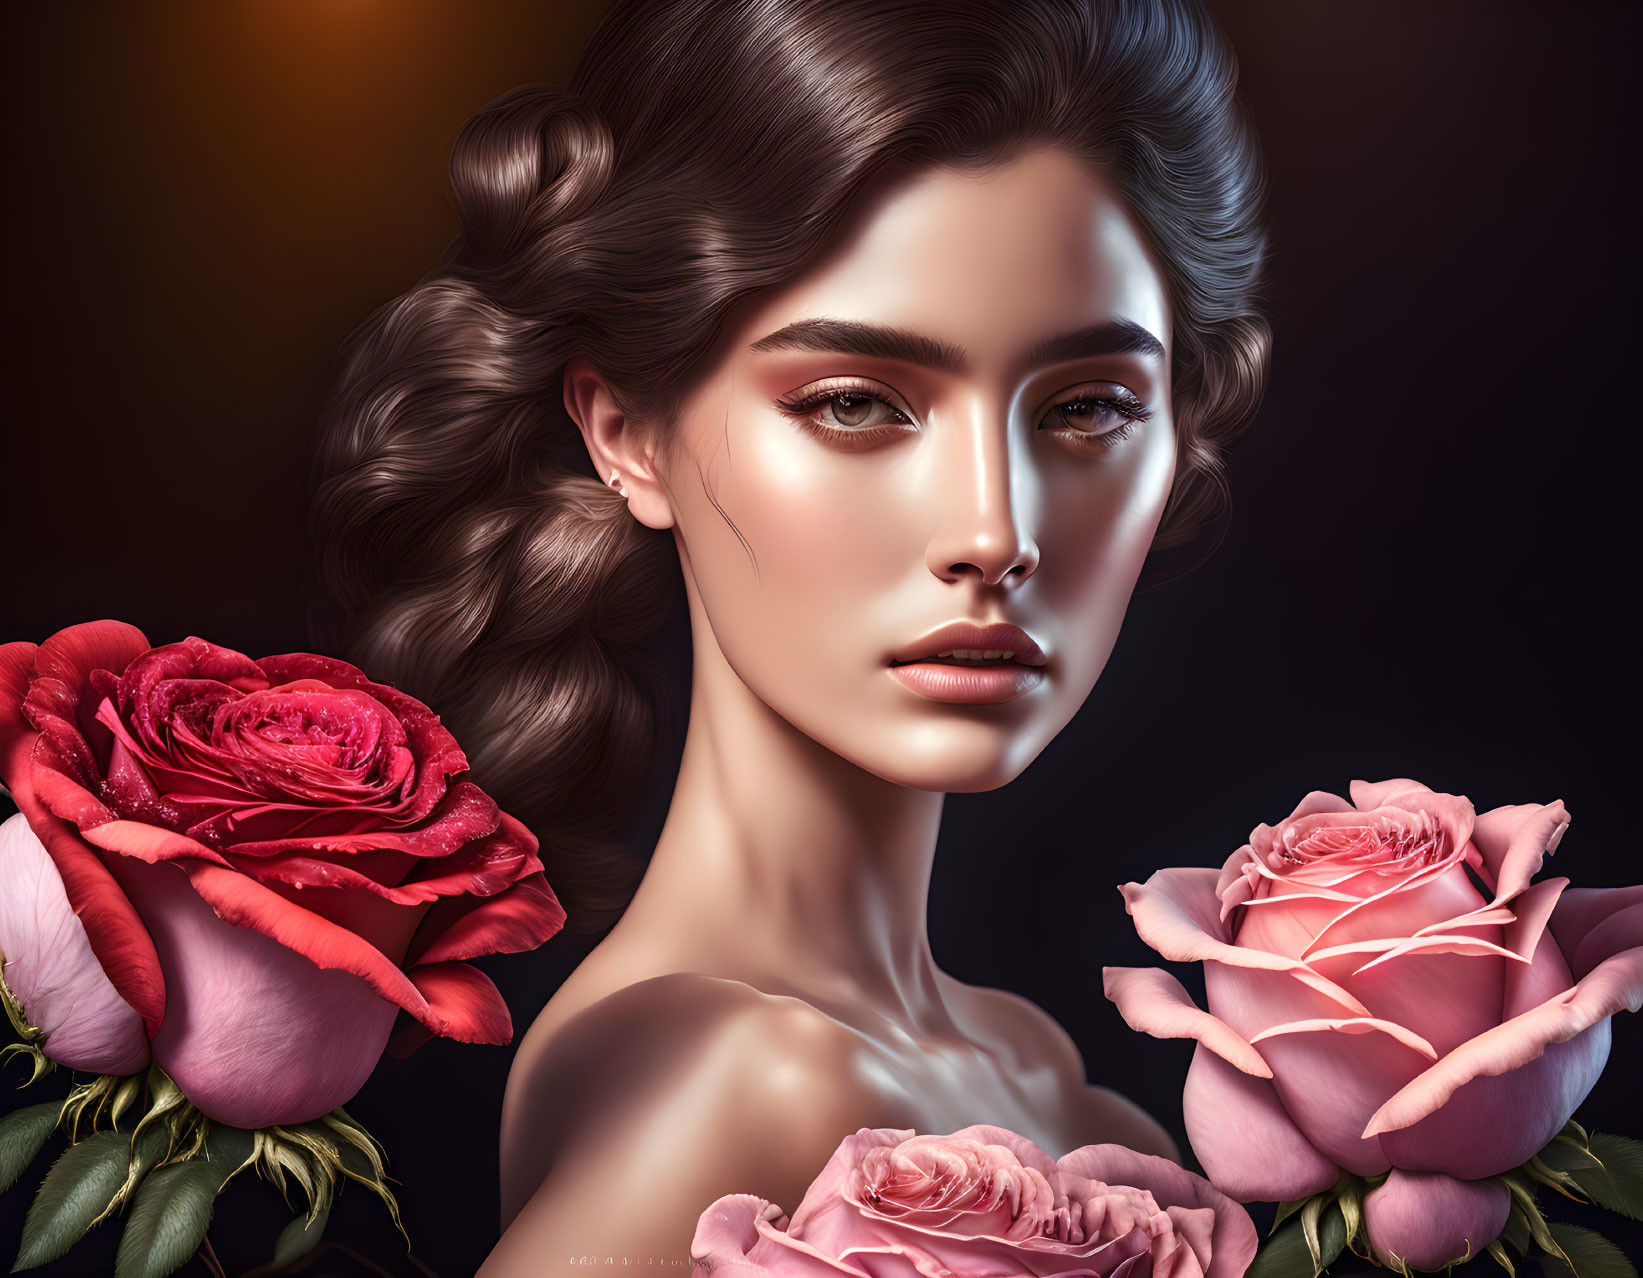 Digital portrait of woman with striking features among lush roses on dark backdrop